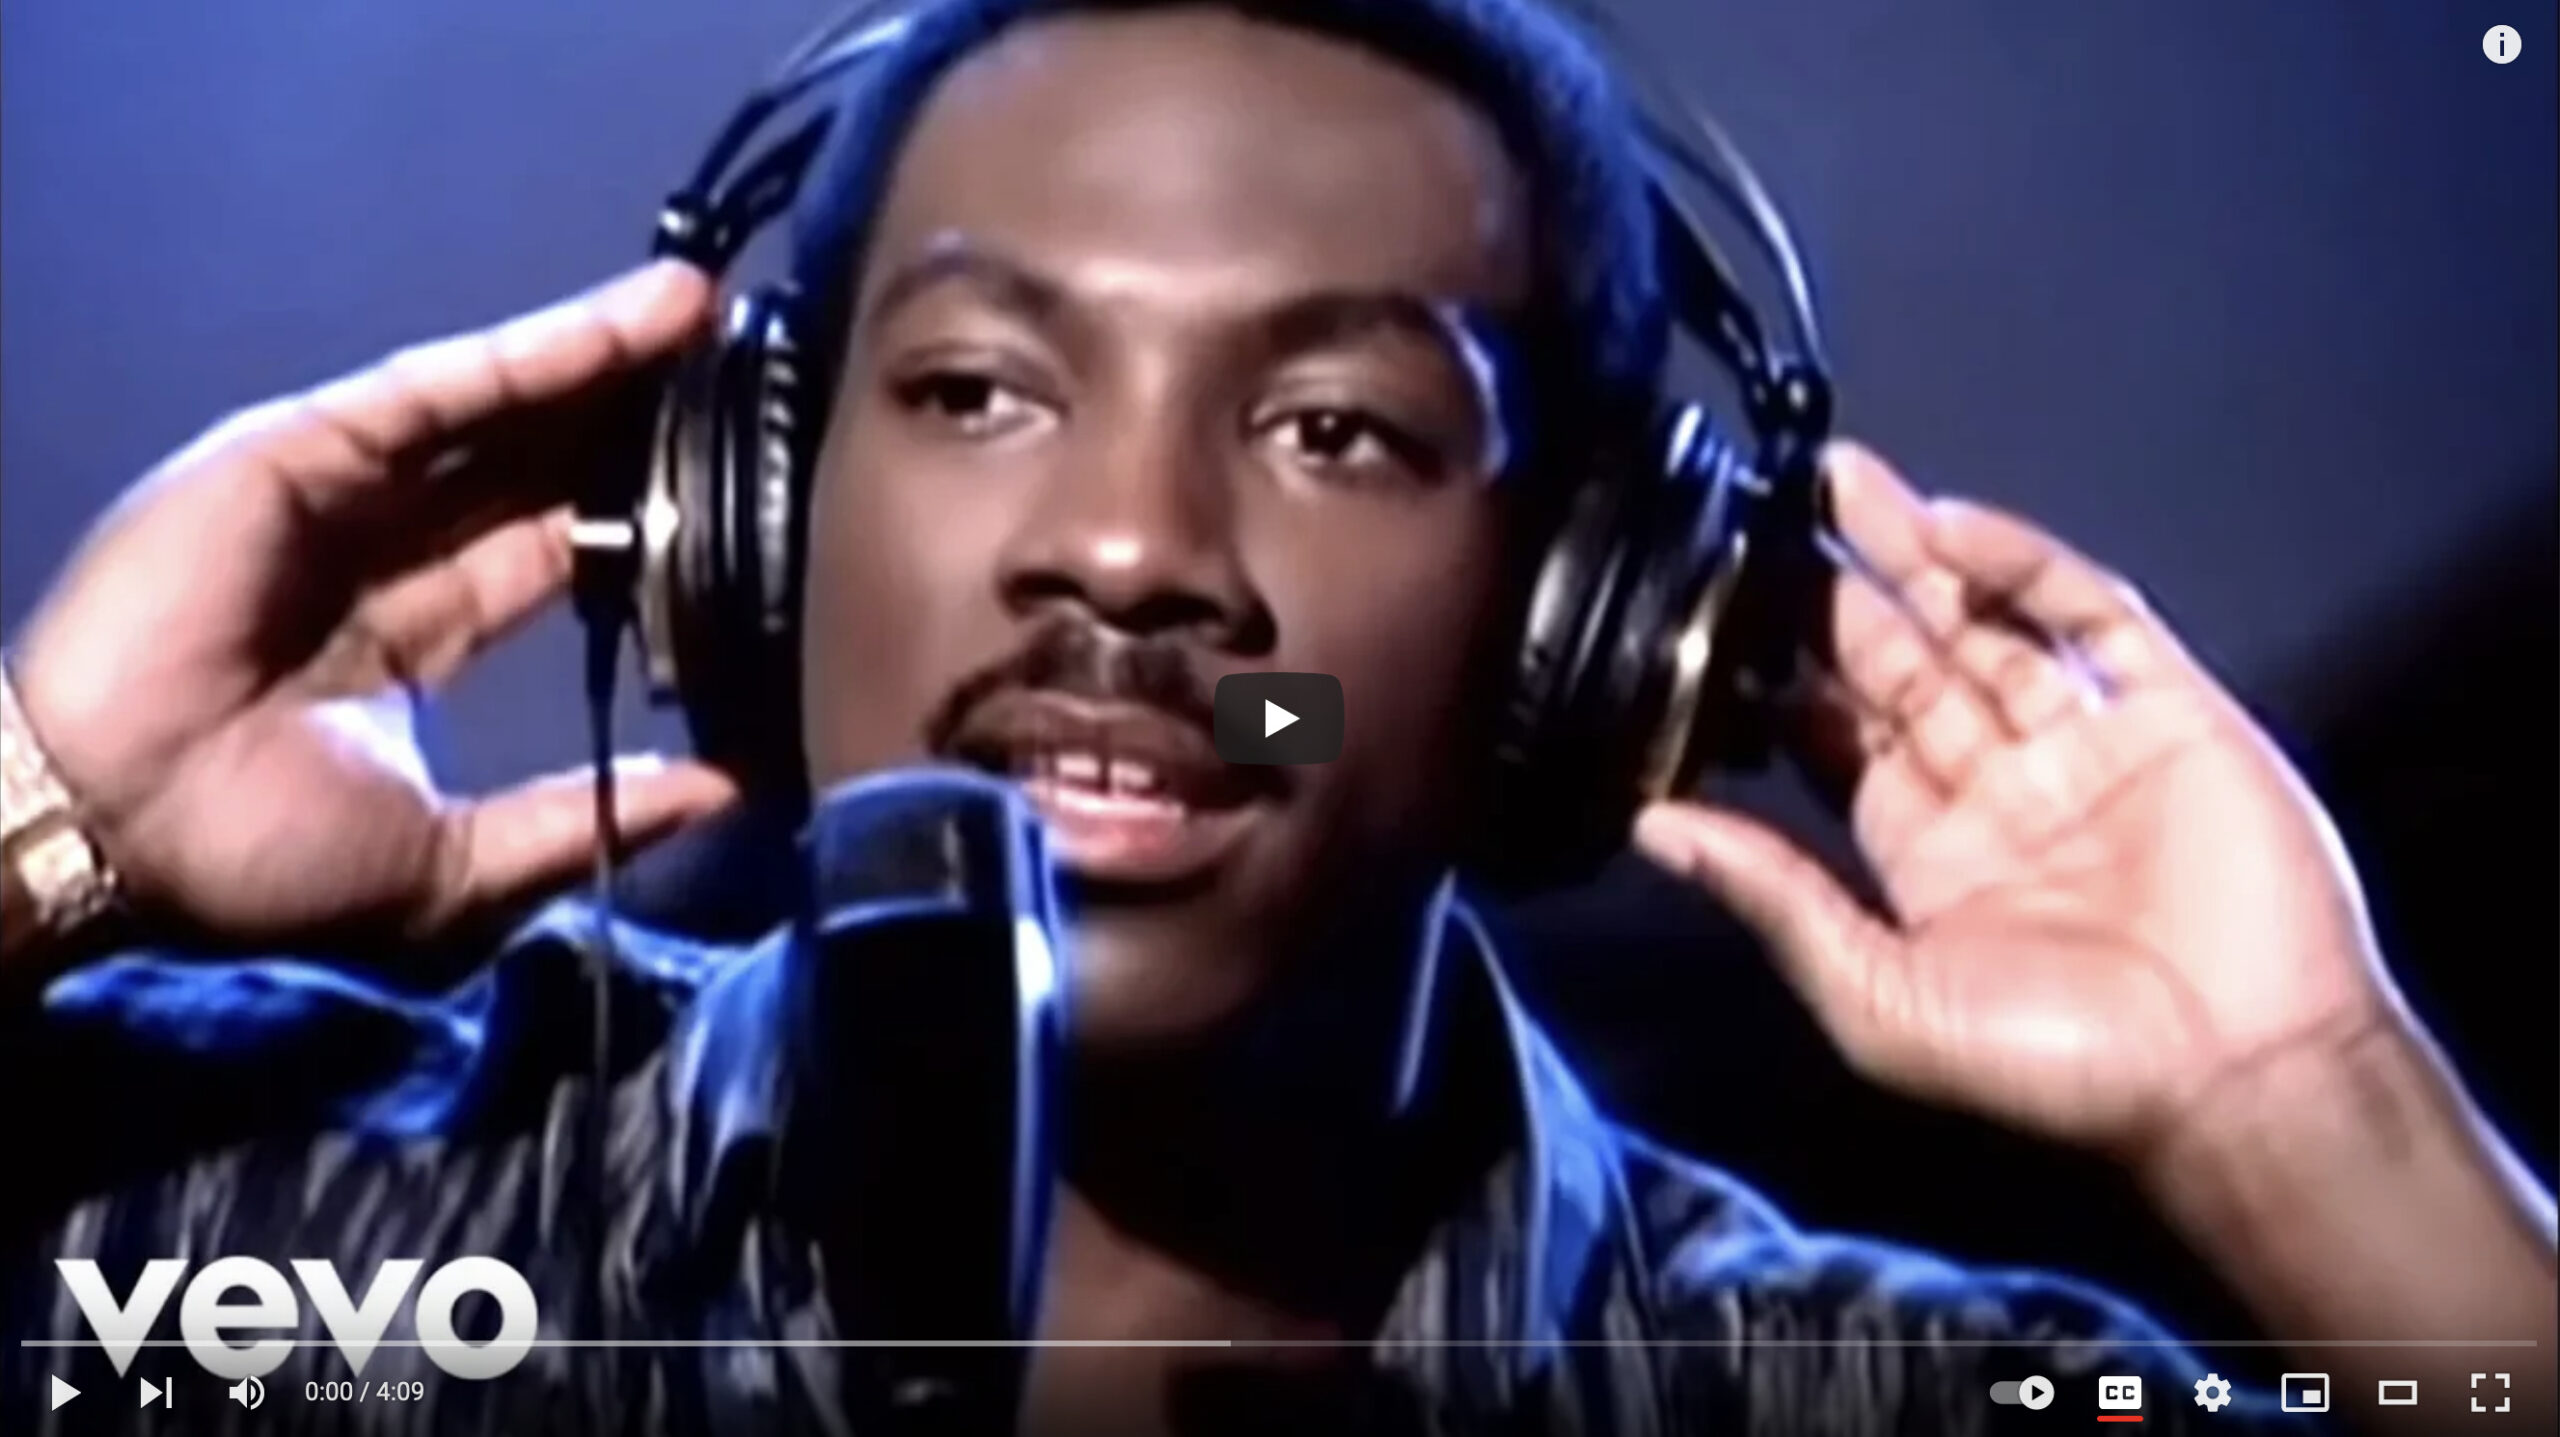 Eddie Murphy - Party All the Time